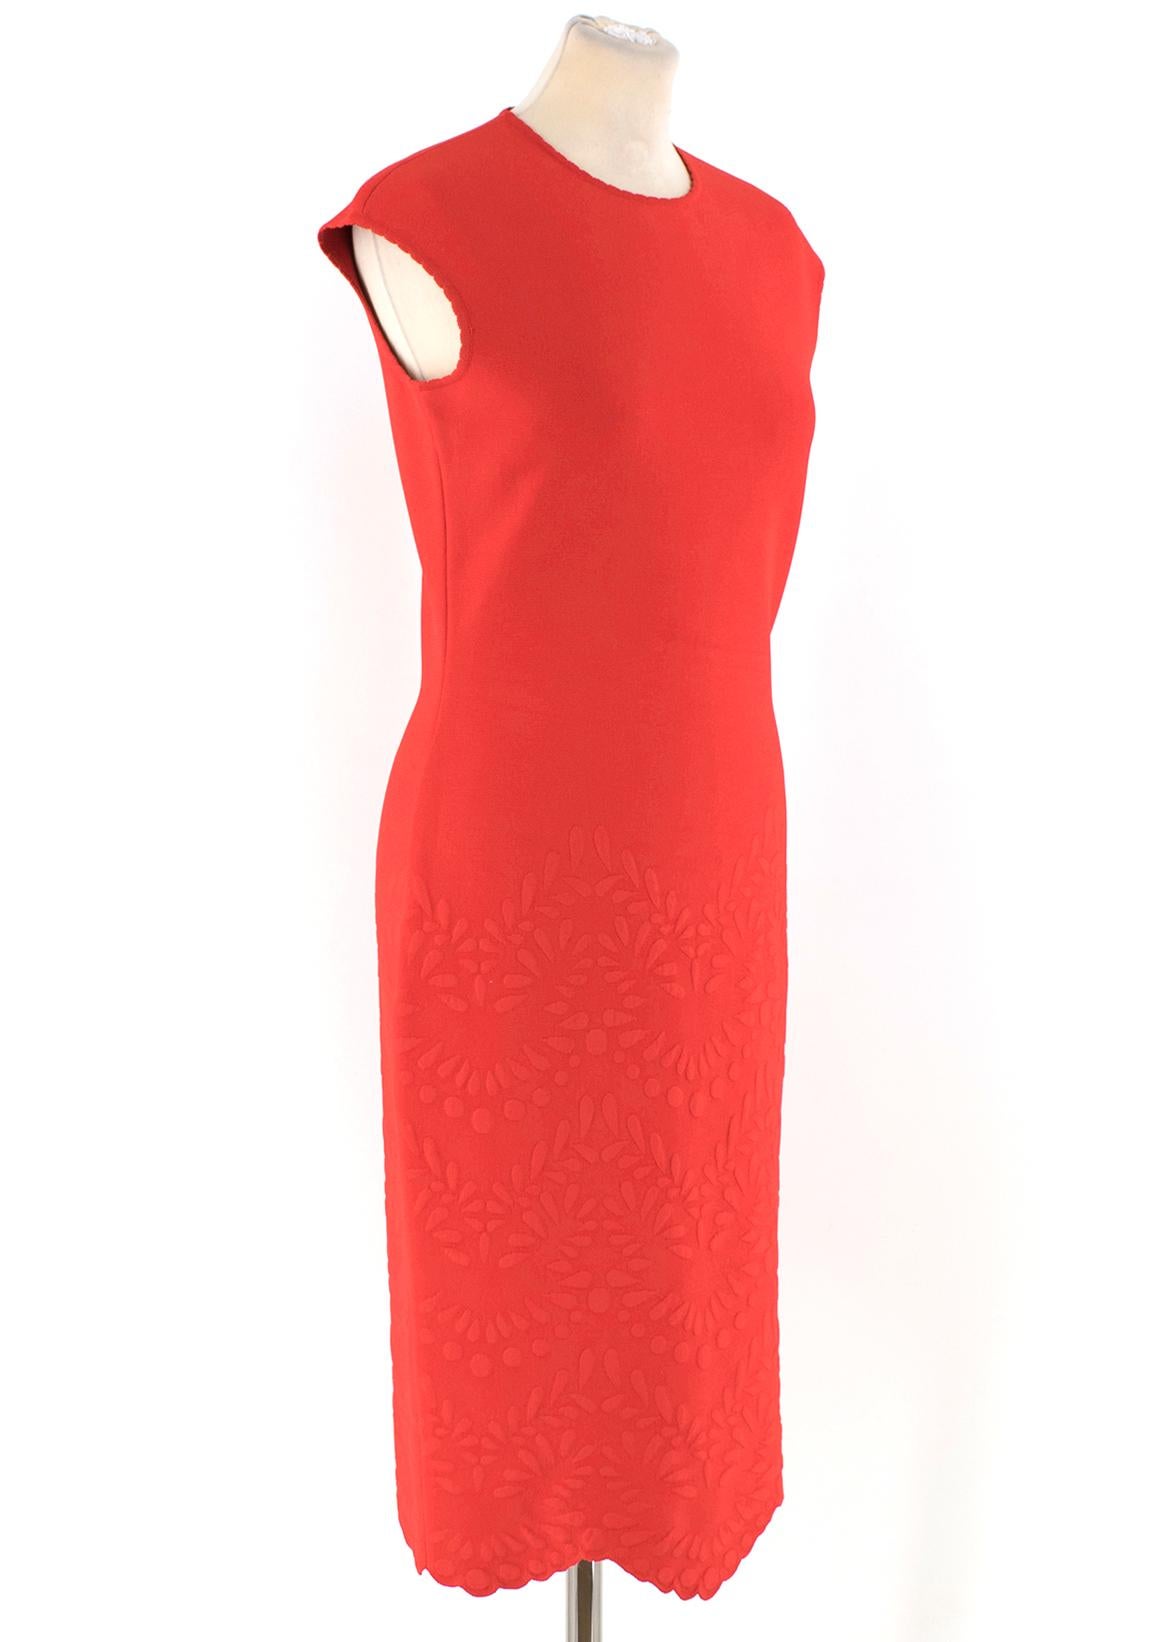 Alexander McQueen Red Jacquard Knit Fitted Dress

-Red, matelasse-jacquard knit dress
-Knee length 
-Sleeveless
-Scalloped hemline
-Scoop neckline

Please note, these items are pre-owned and may show signs of being stored even when unworn and